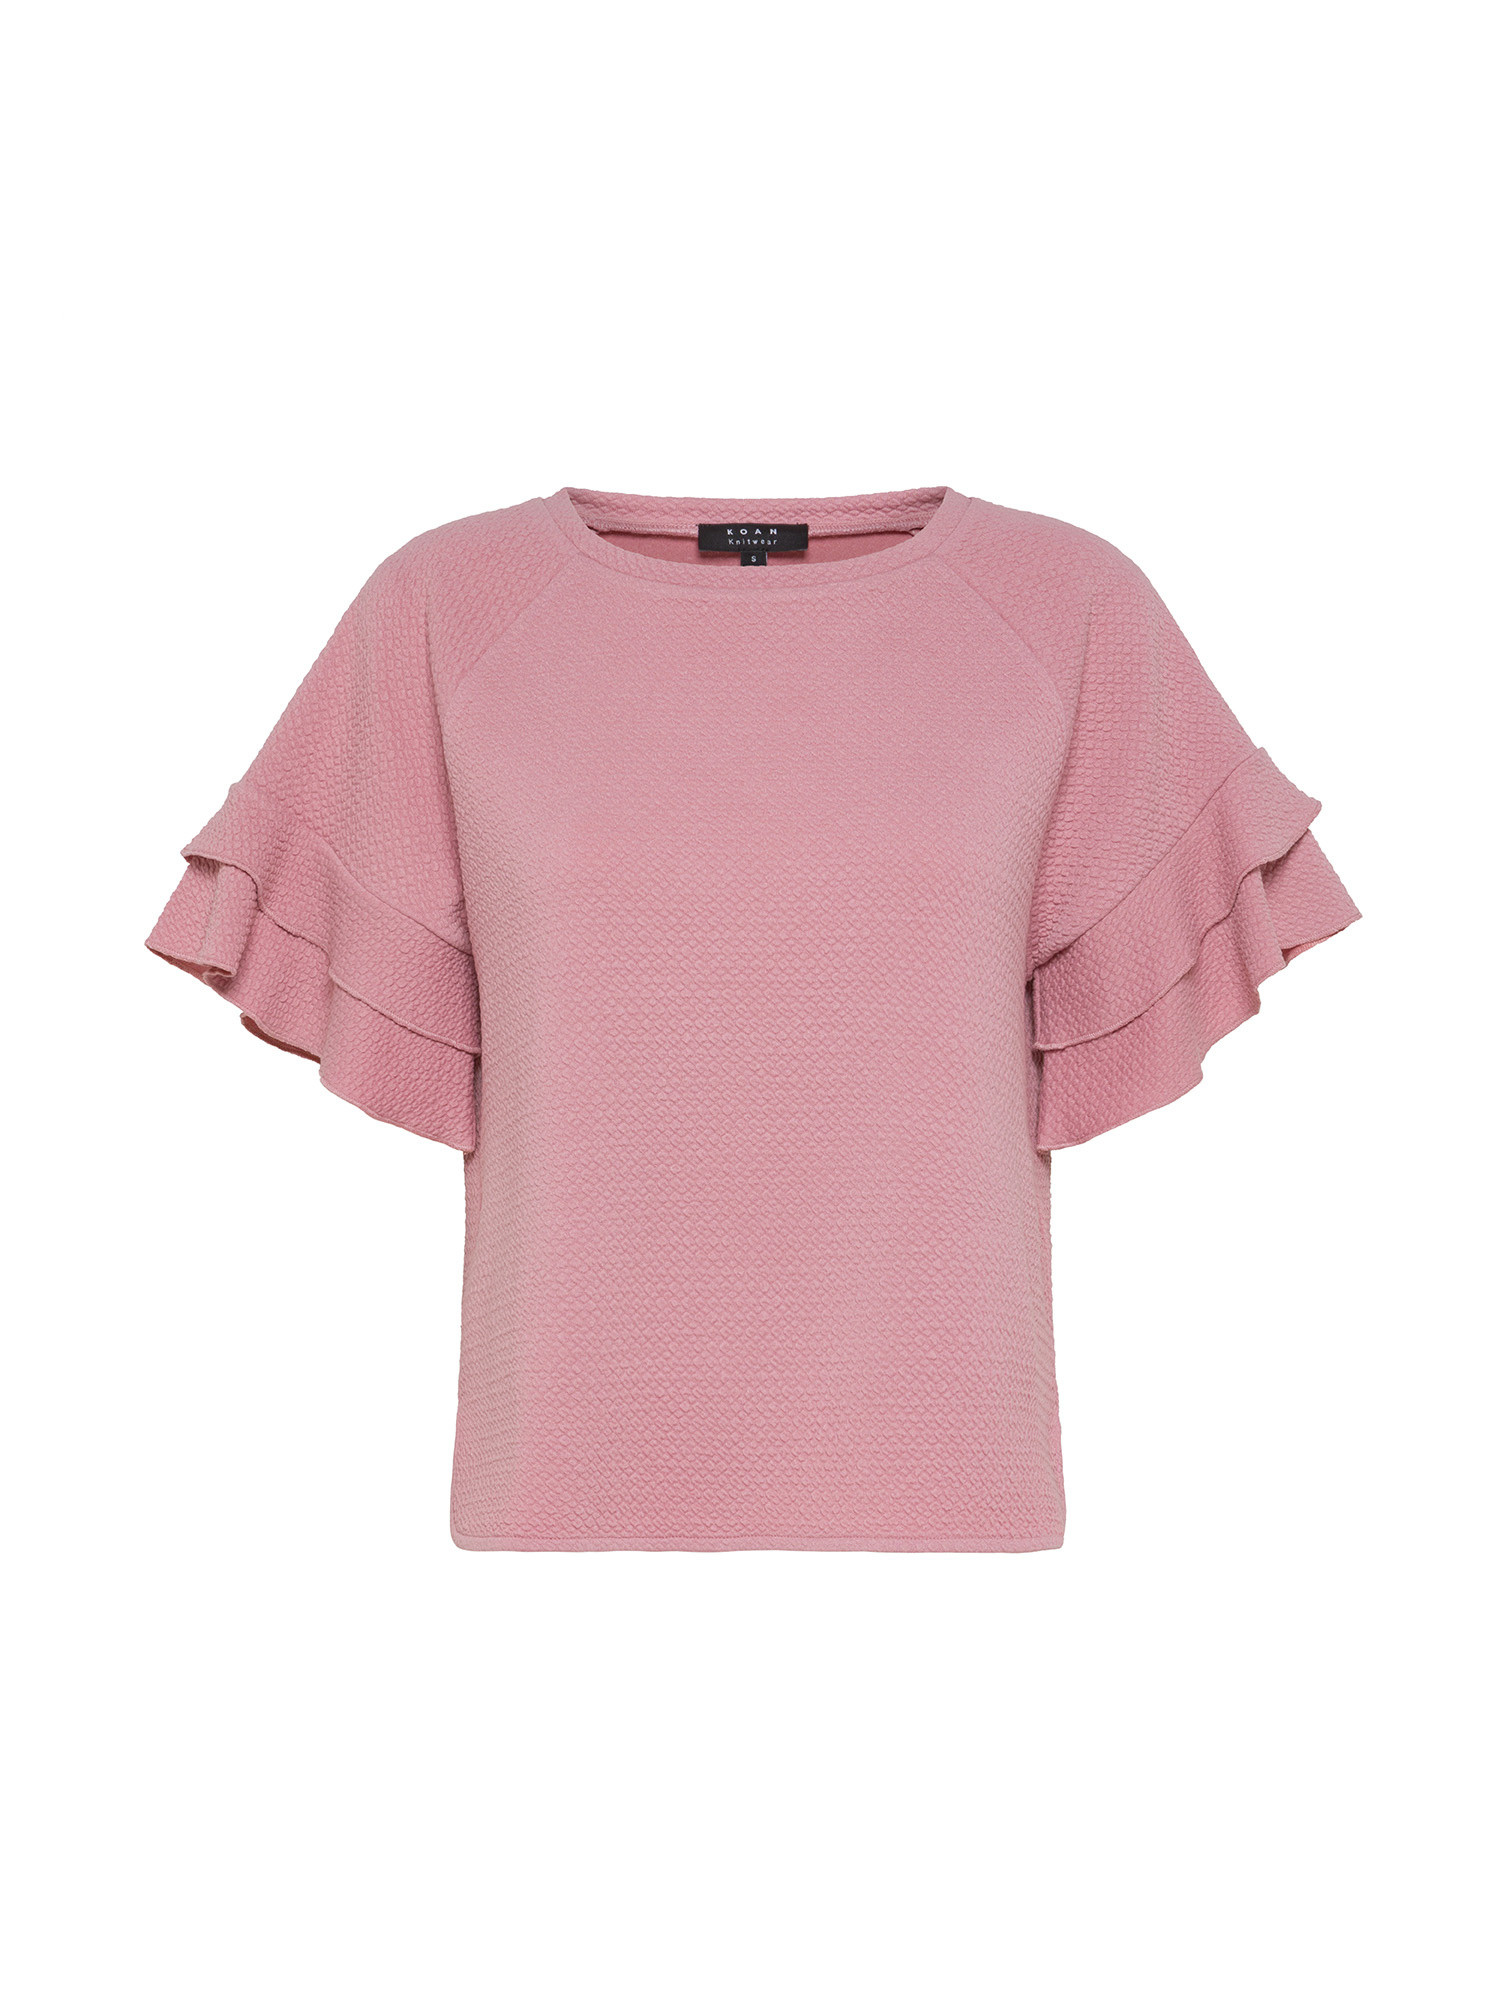 Koan - T-shirt with ruffles, Pink, large image number 0